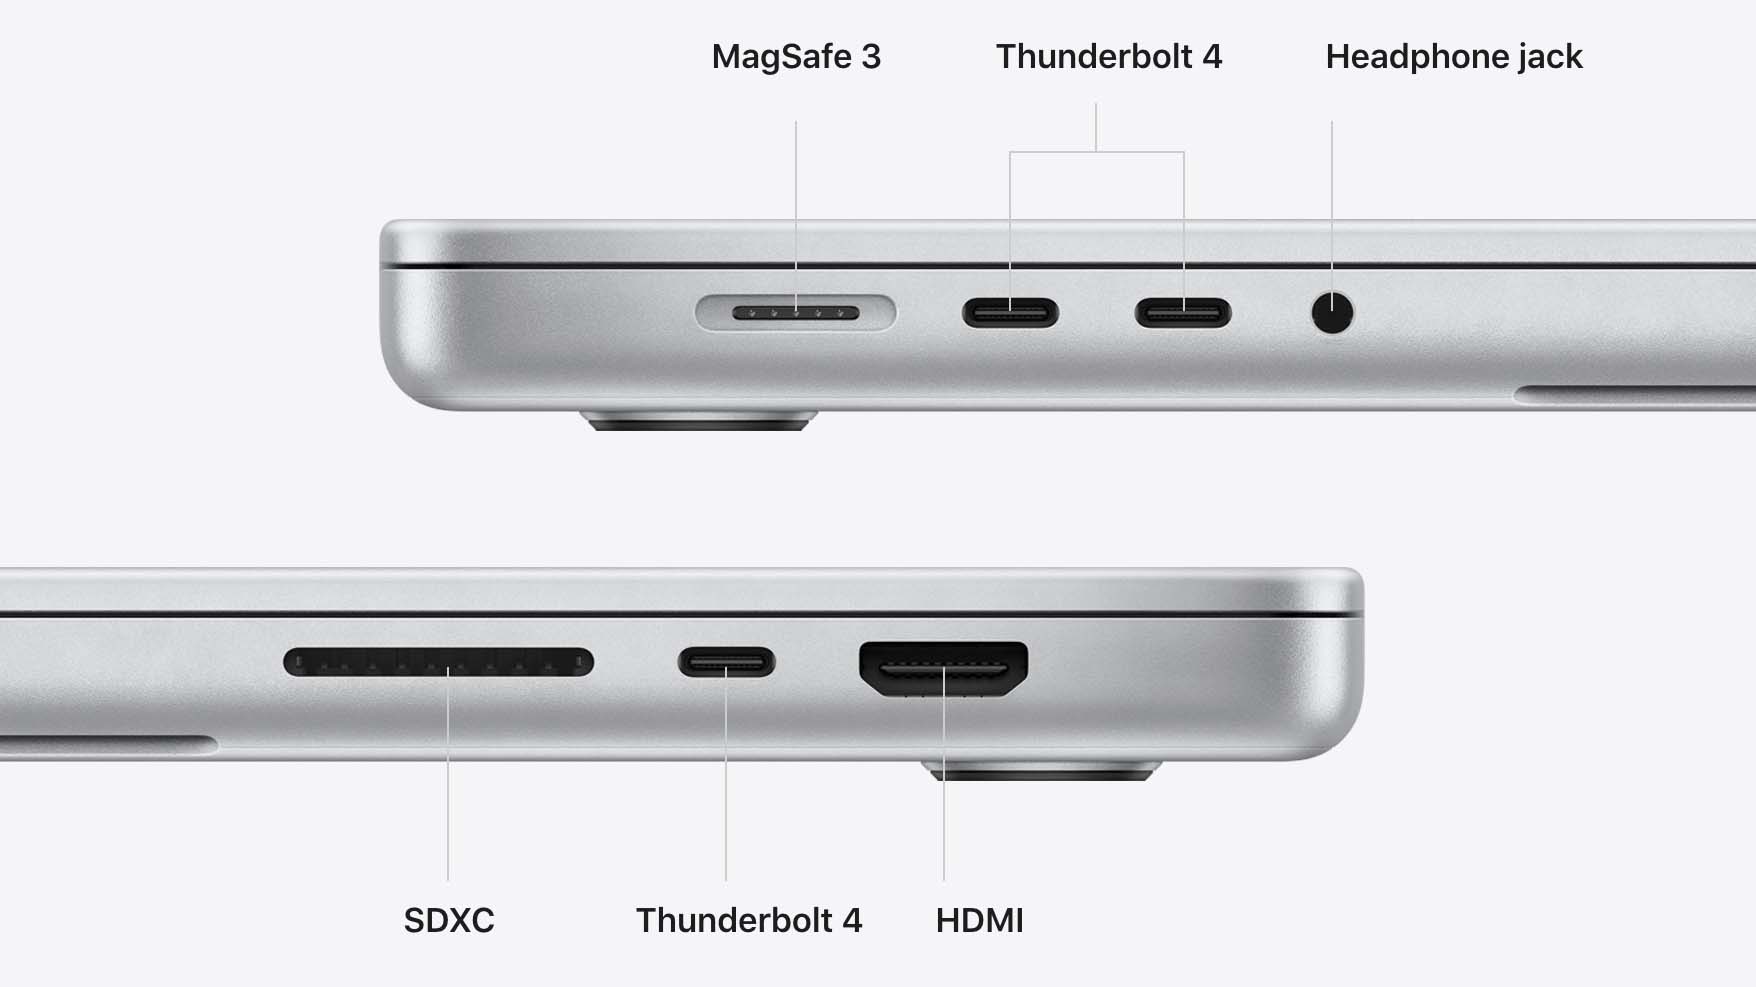 Apple's MacBook Pro features HDMI 2.0 and not HDMI 2.1